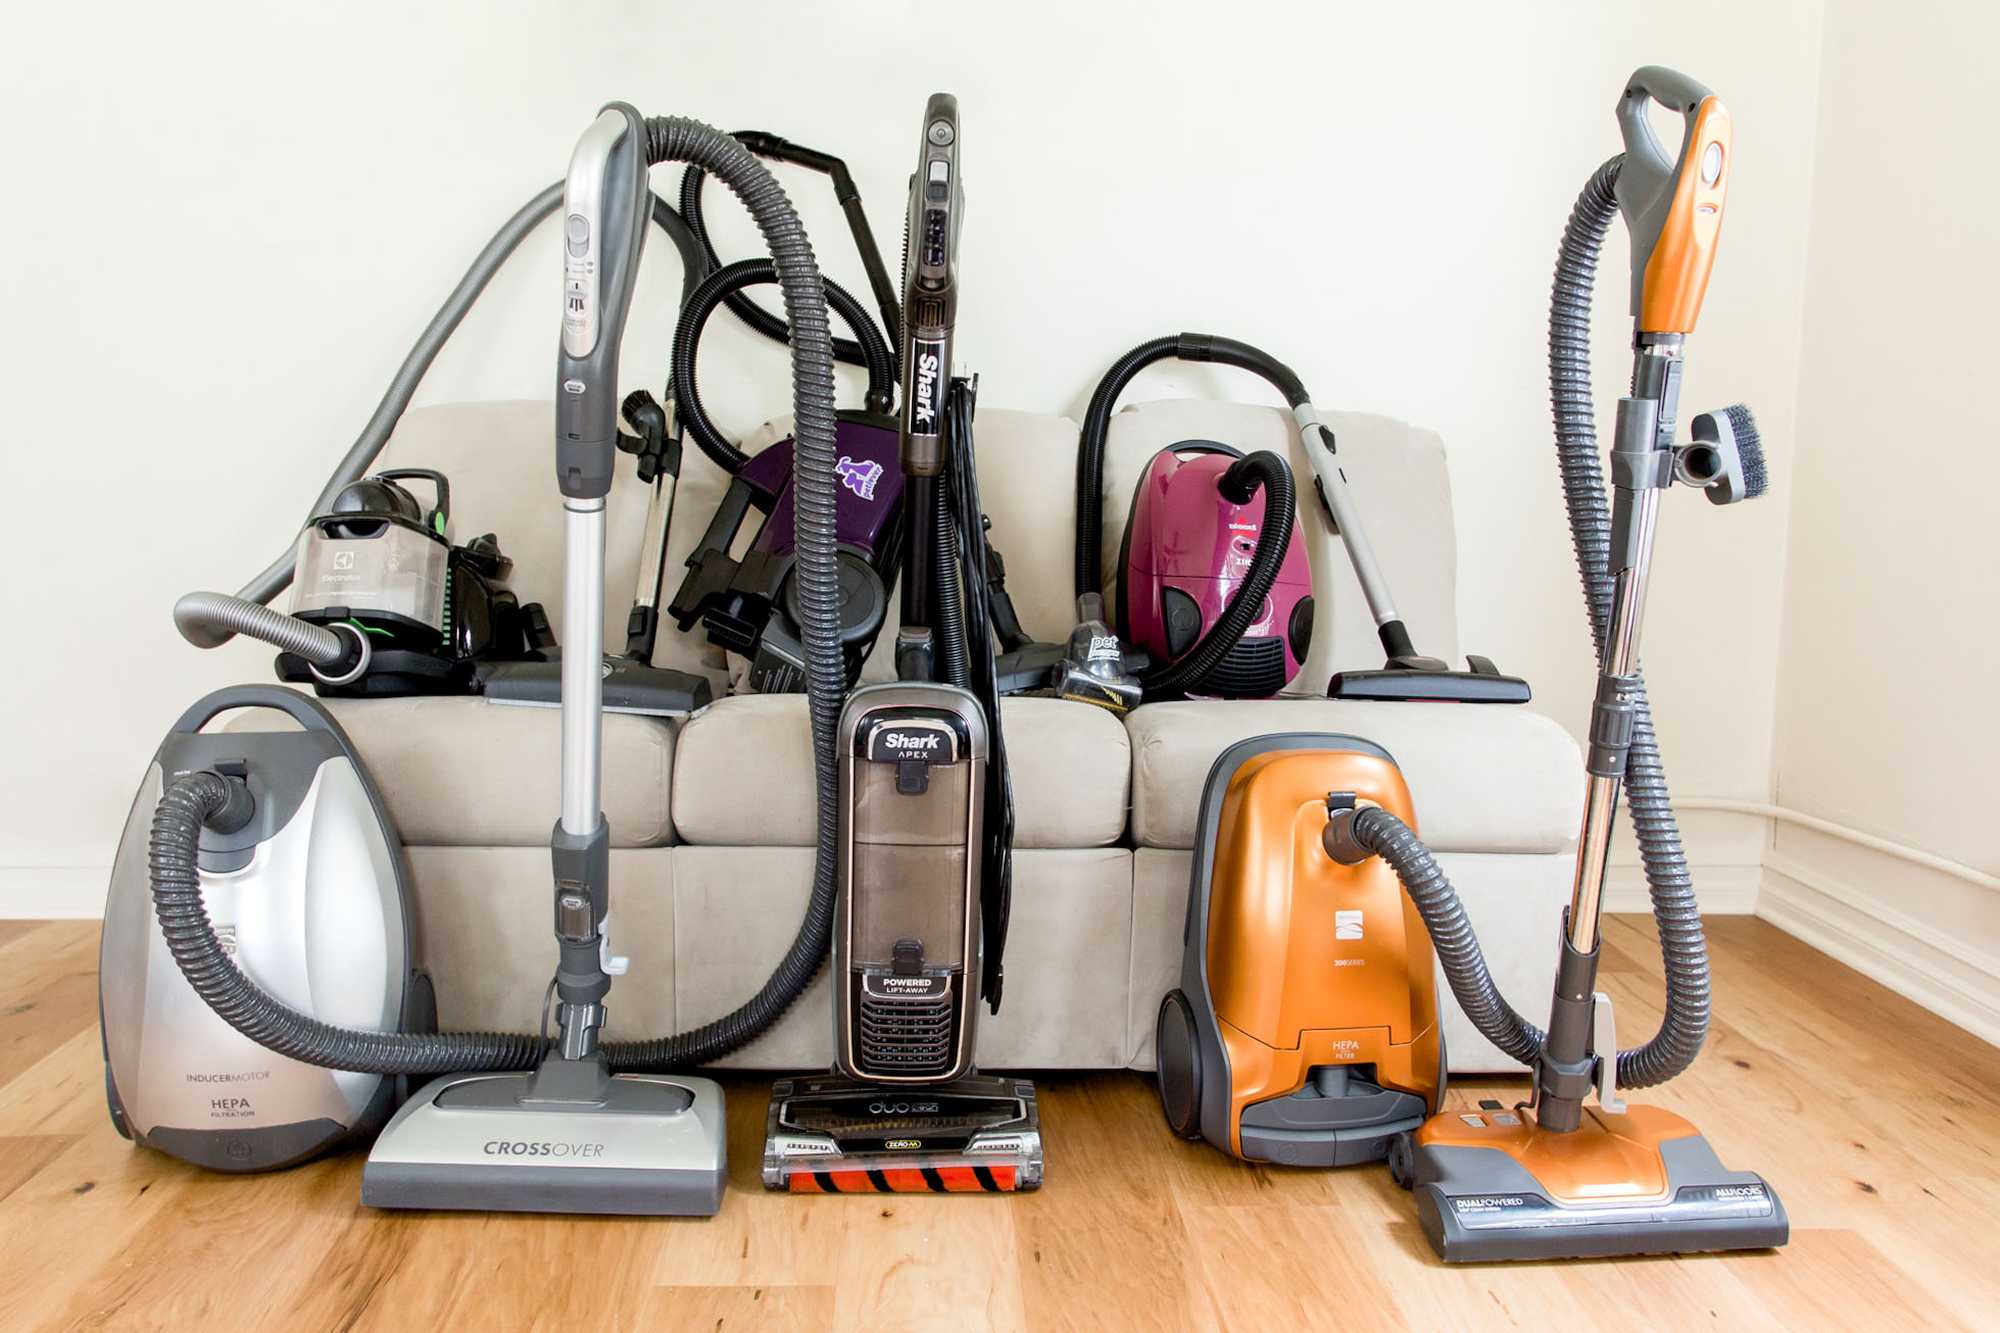 The Best Canister Vacuums Of 2021, Best Canister Vacuum For Laminate Floors